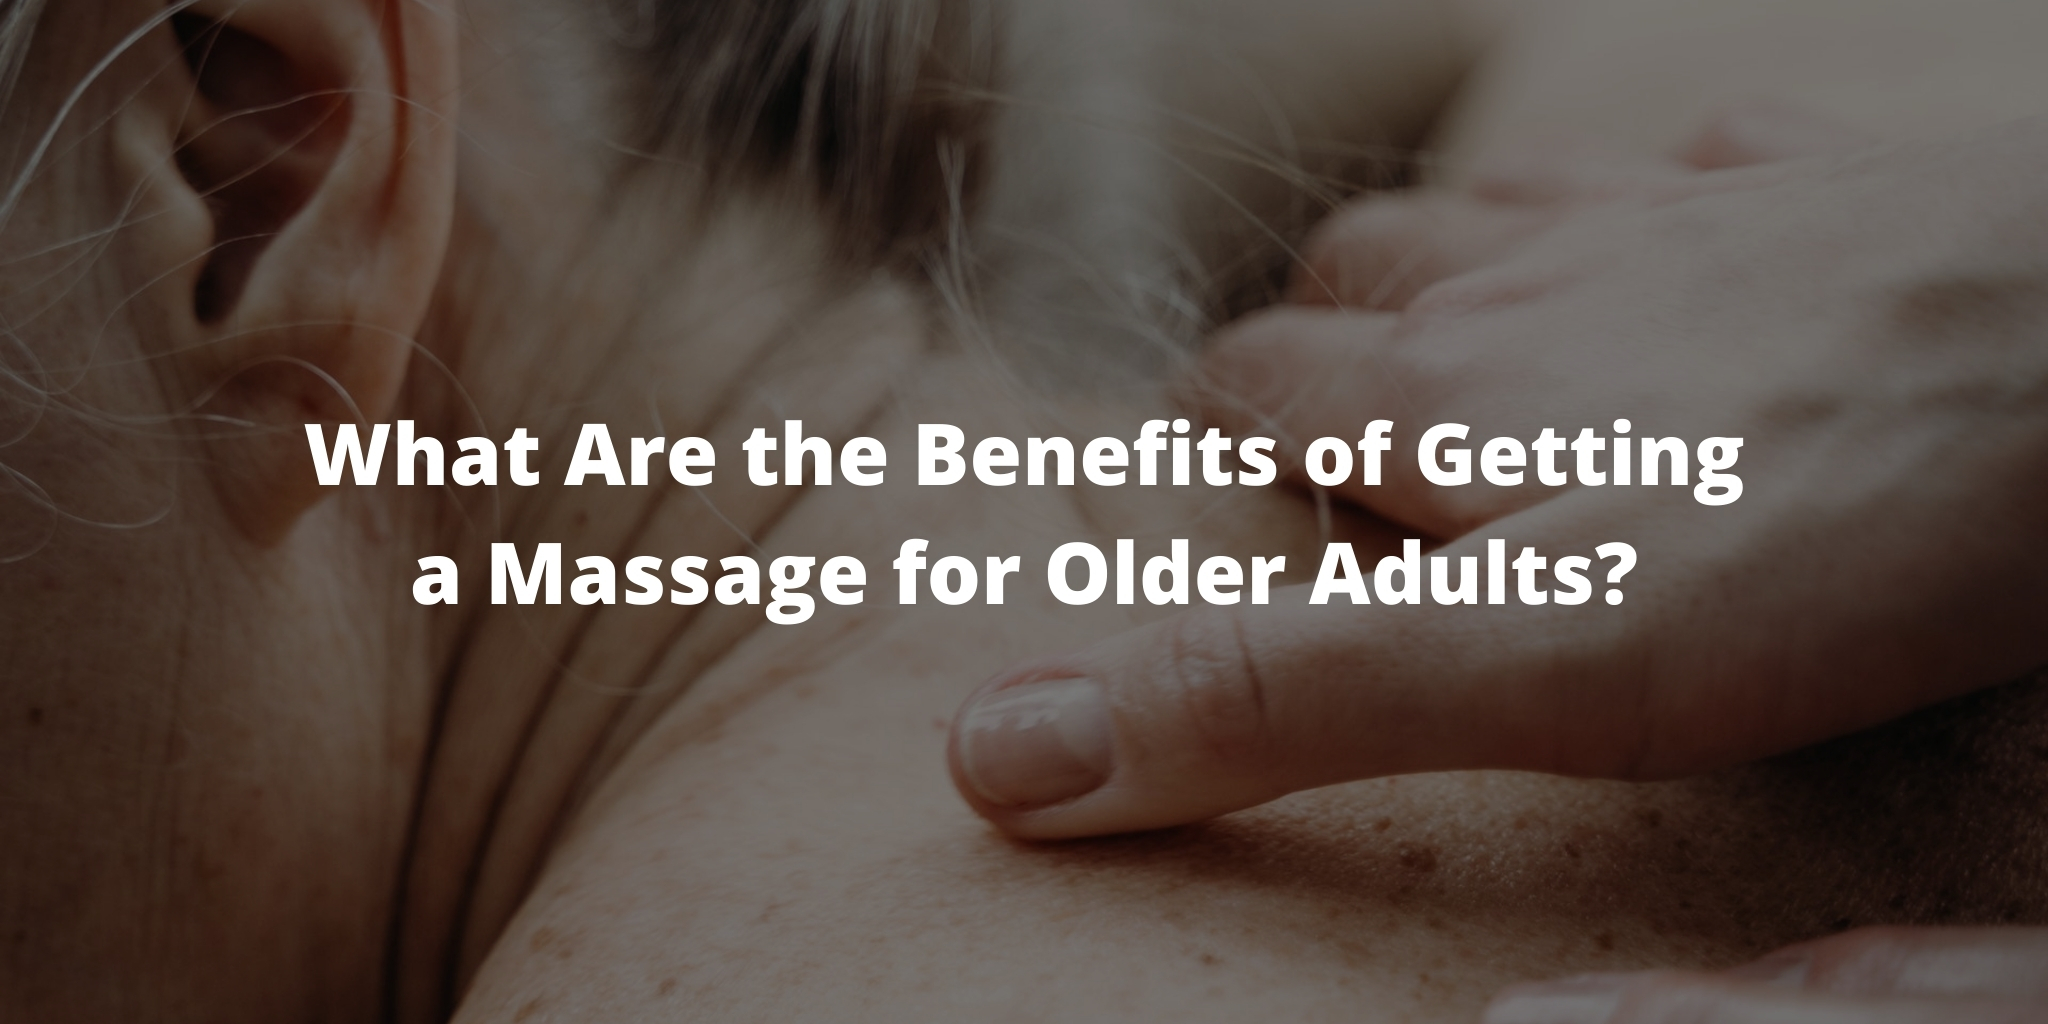 What Are the Benefits of Getting a Massage for Older Adults?